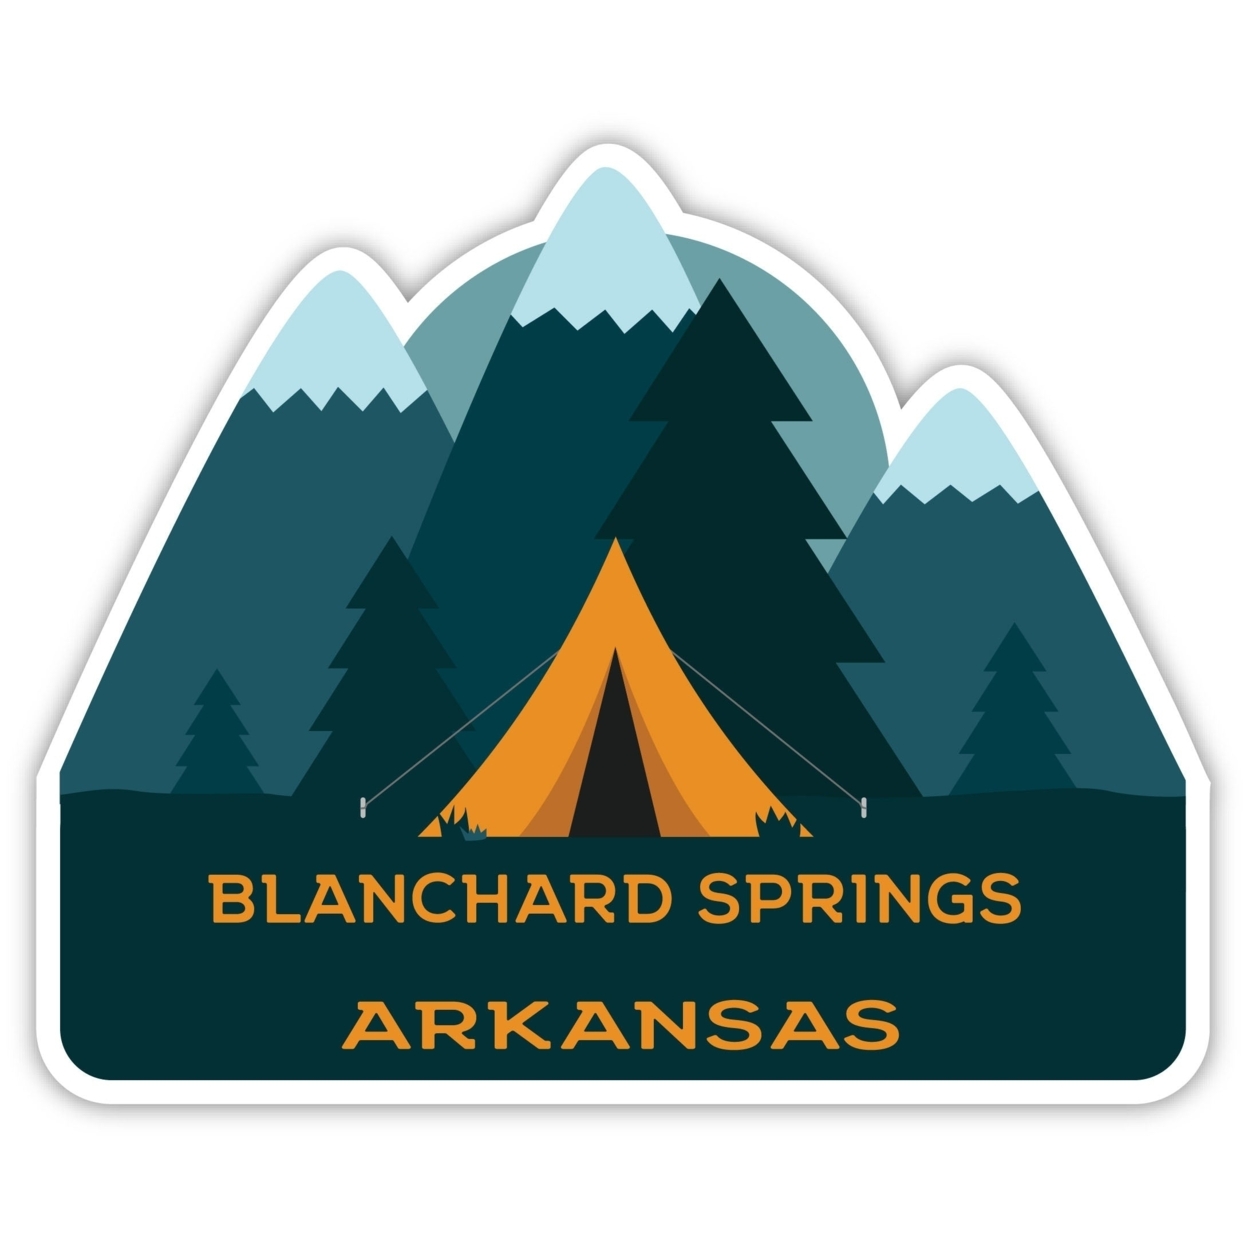 Blanchard Springs Arkansas Souvenir Decorative Stickers (Choose Theme And Size) - 4-Pack, 2-Inch, Adventures Awaits